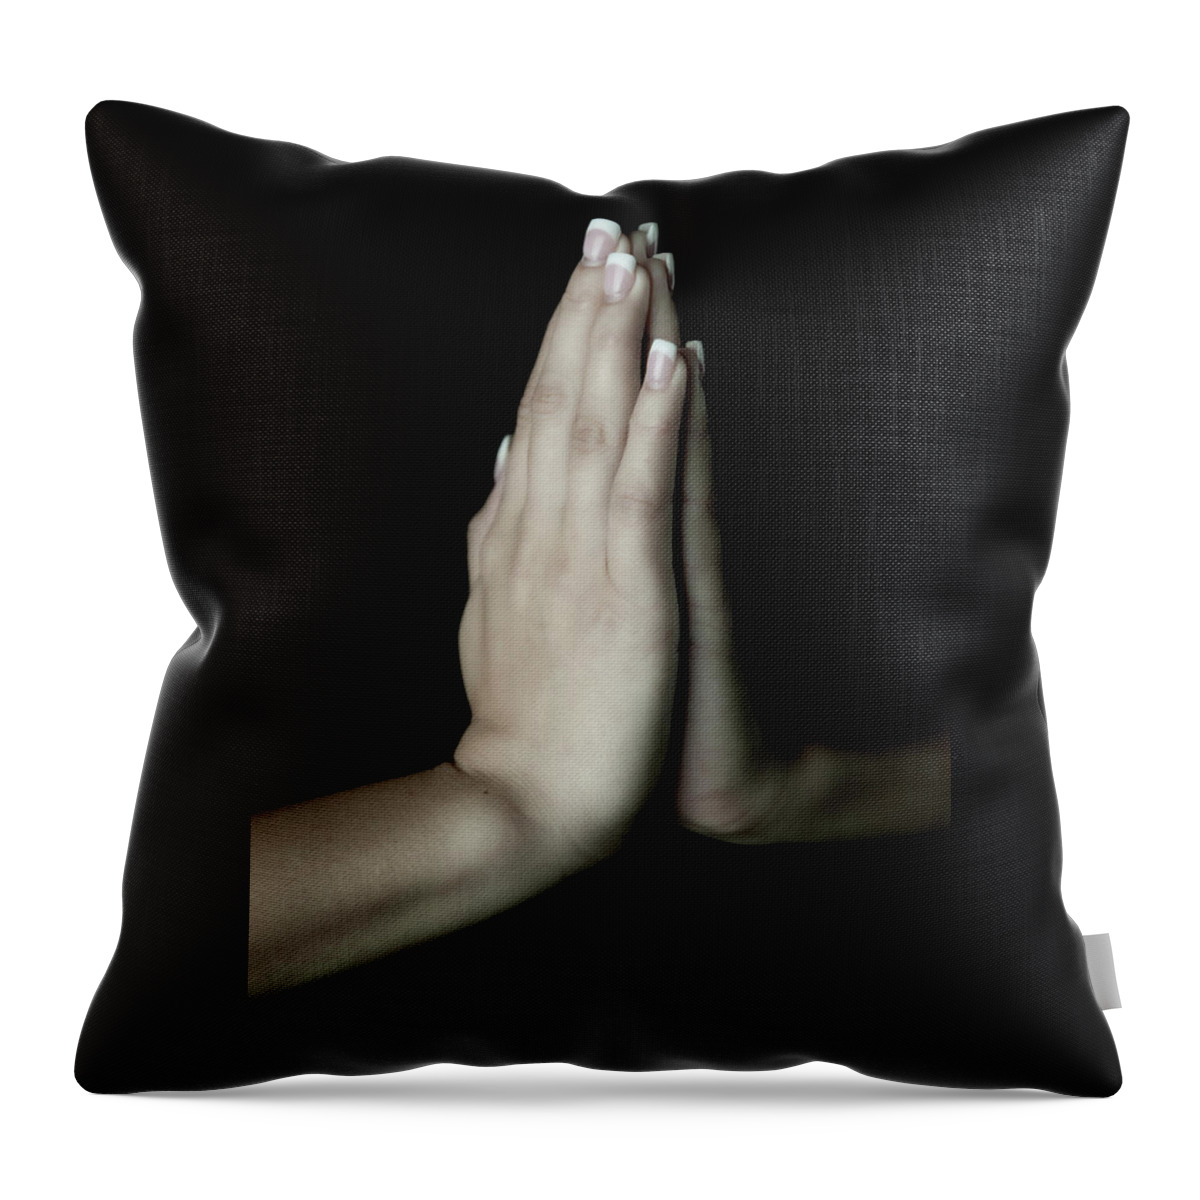 Yoga Throw Pillow featuring the photograph Prayer Hands by Marian Tagliarino